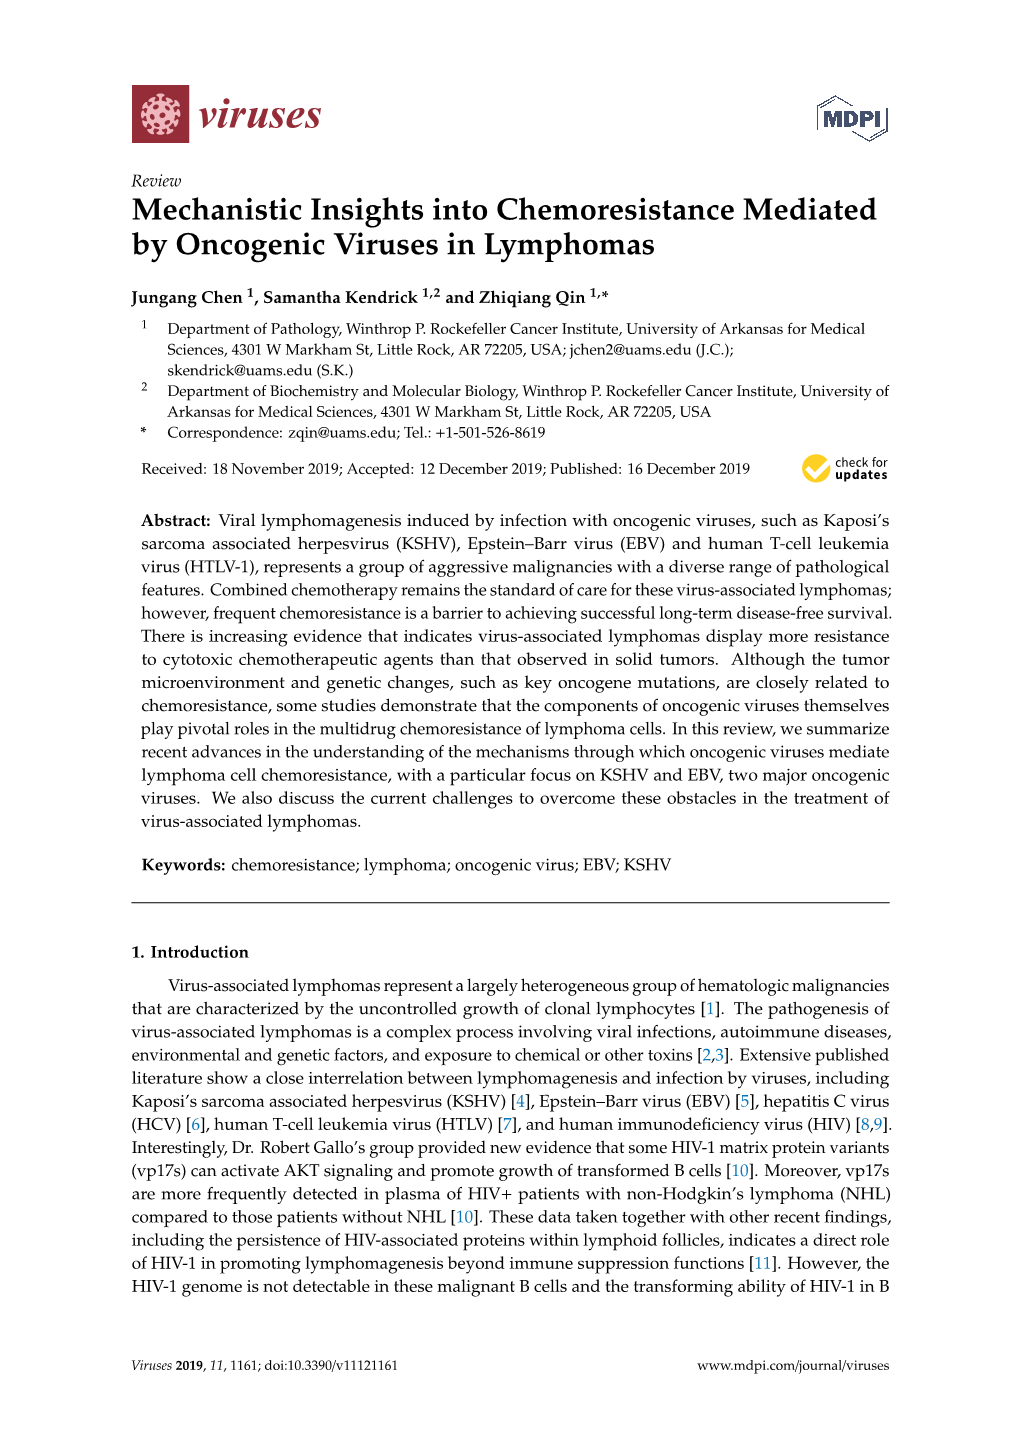 Mechanistic Insights Into Chemoresistance Mediated by Oncogenic Viruses in Lymphomas